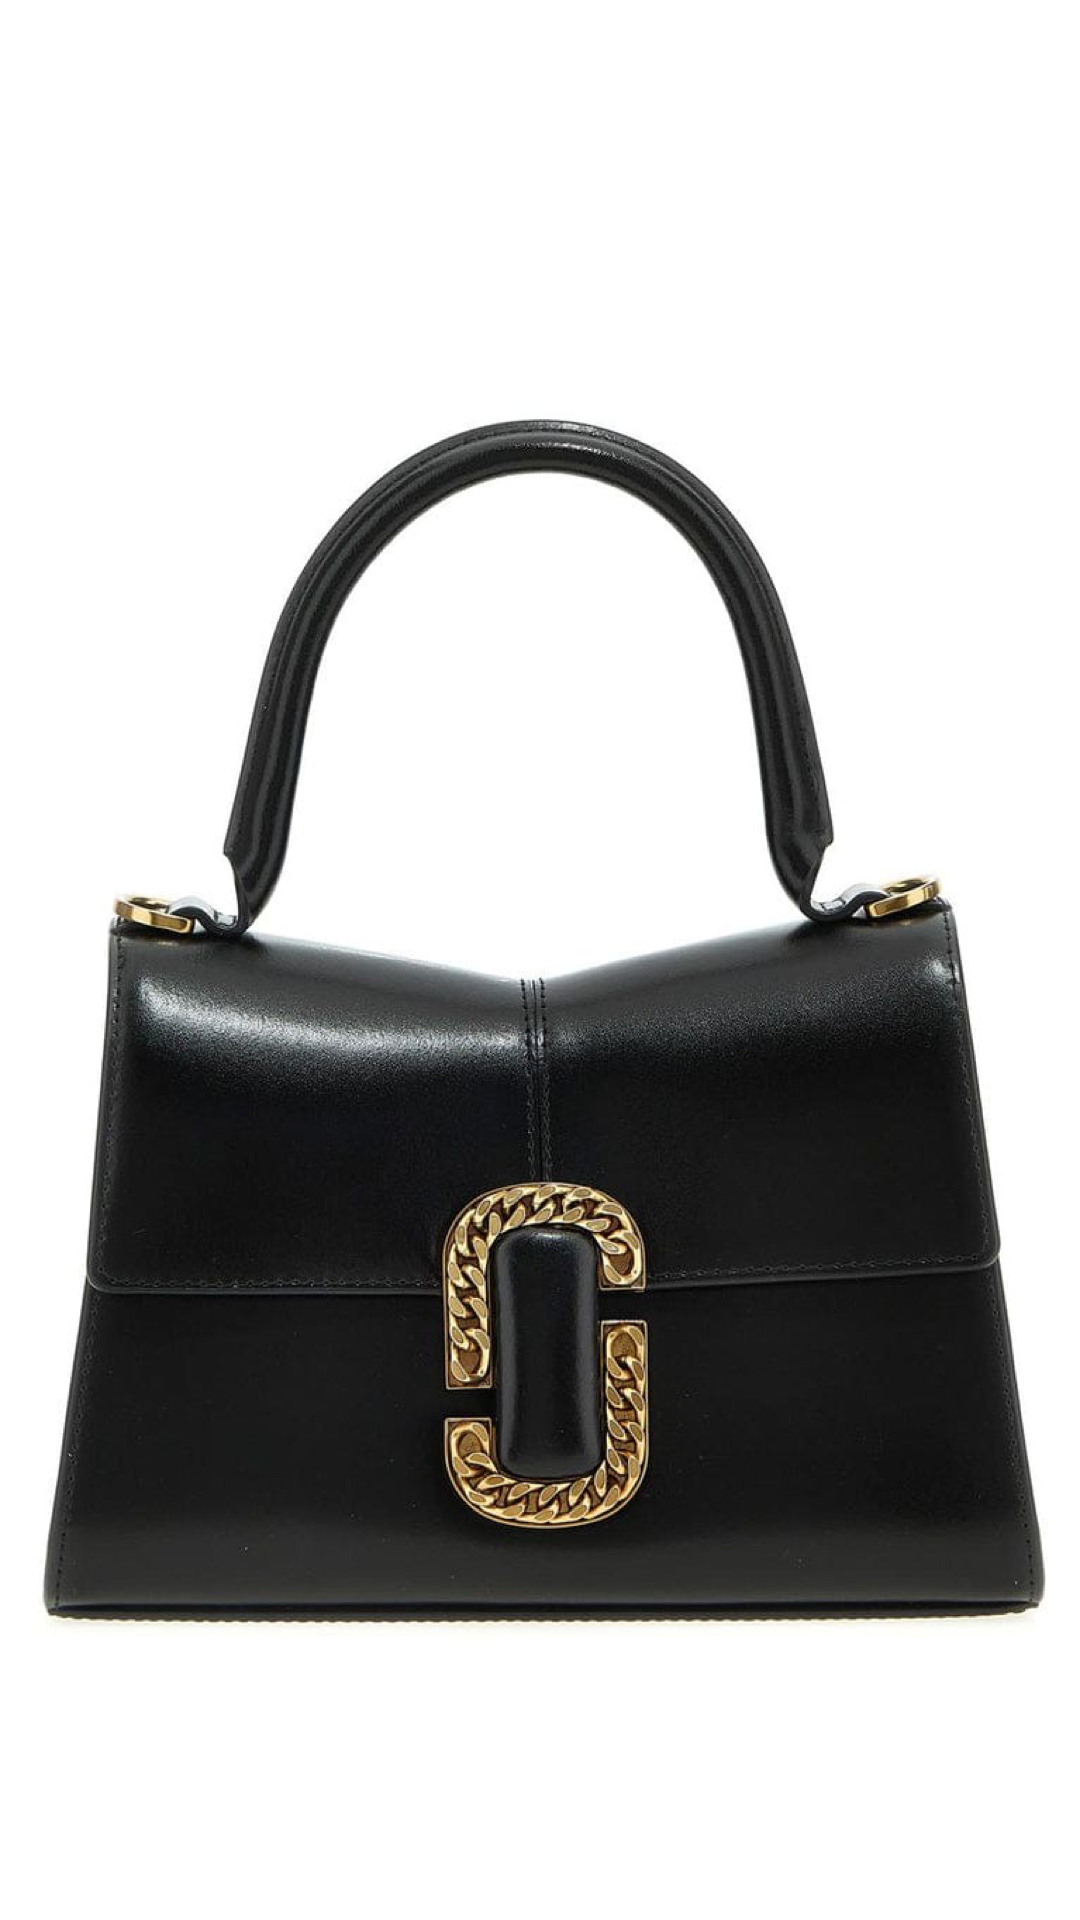 MARC JACOBS LOGO LEATHER